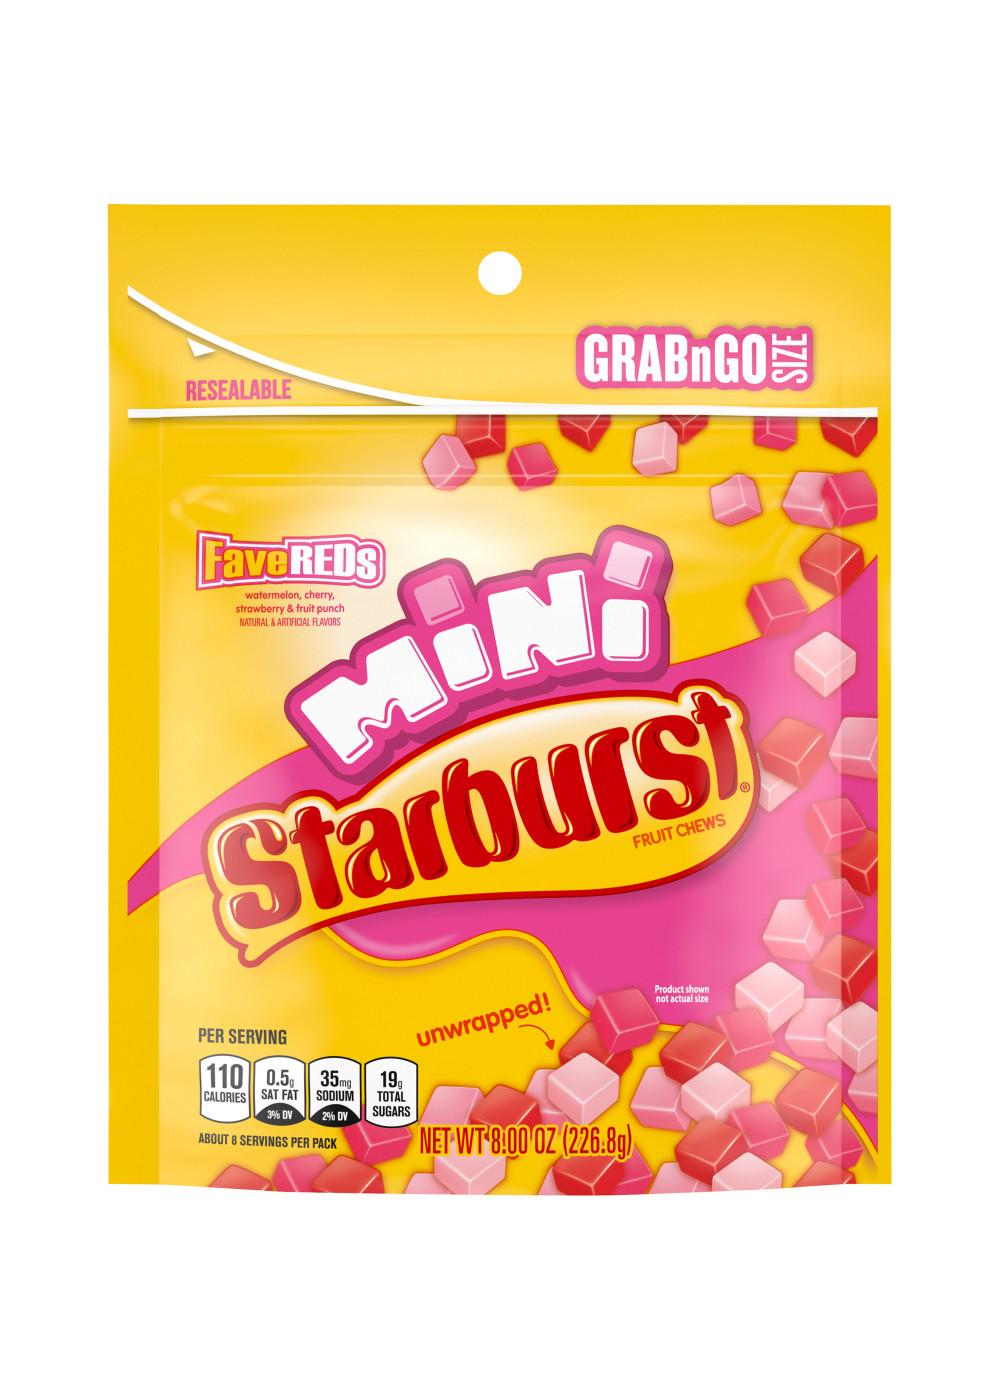 Starburst FaveReds Minis Chewy Candy - Grab & Go Size; image 1 of 5